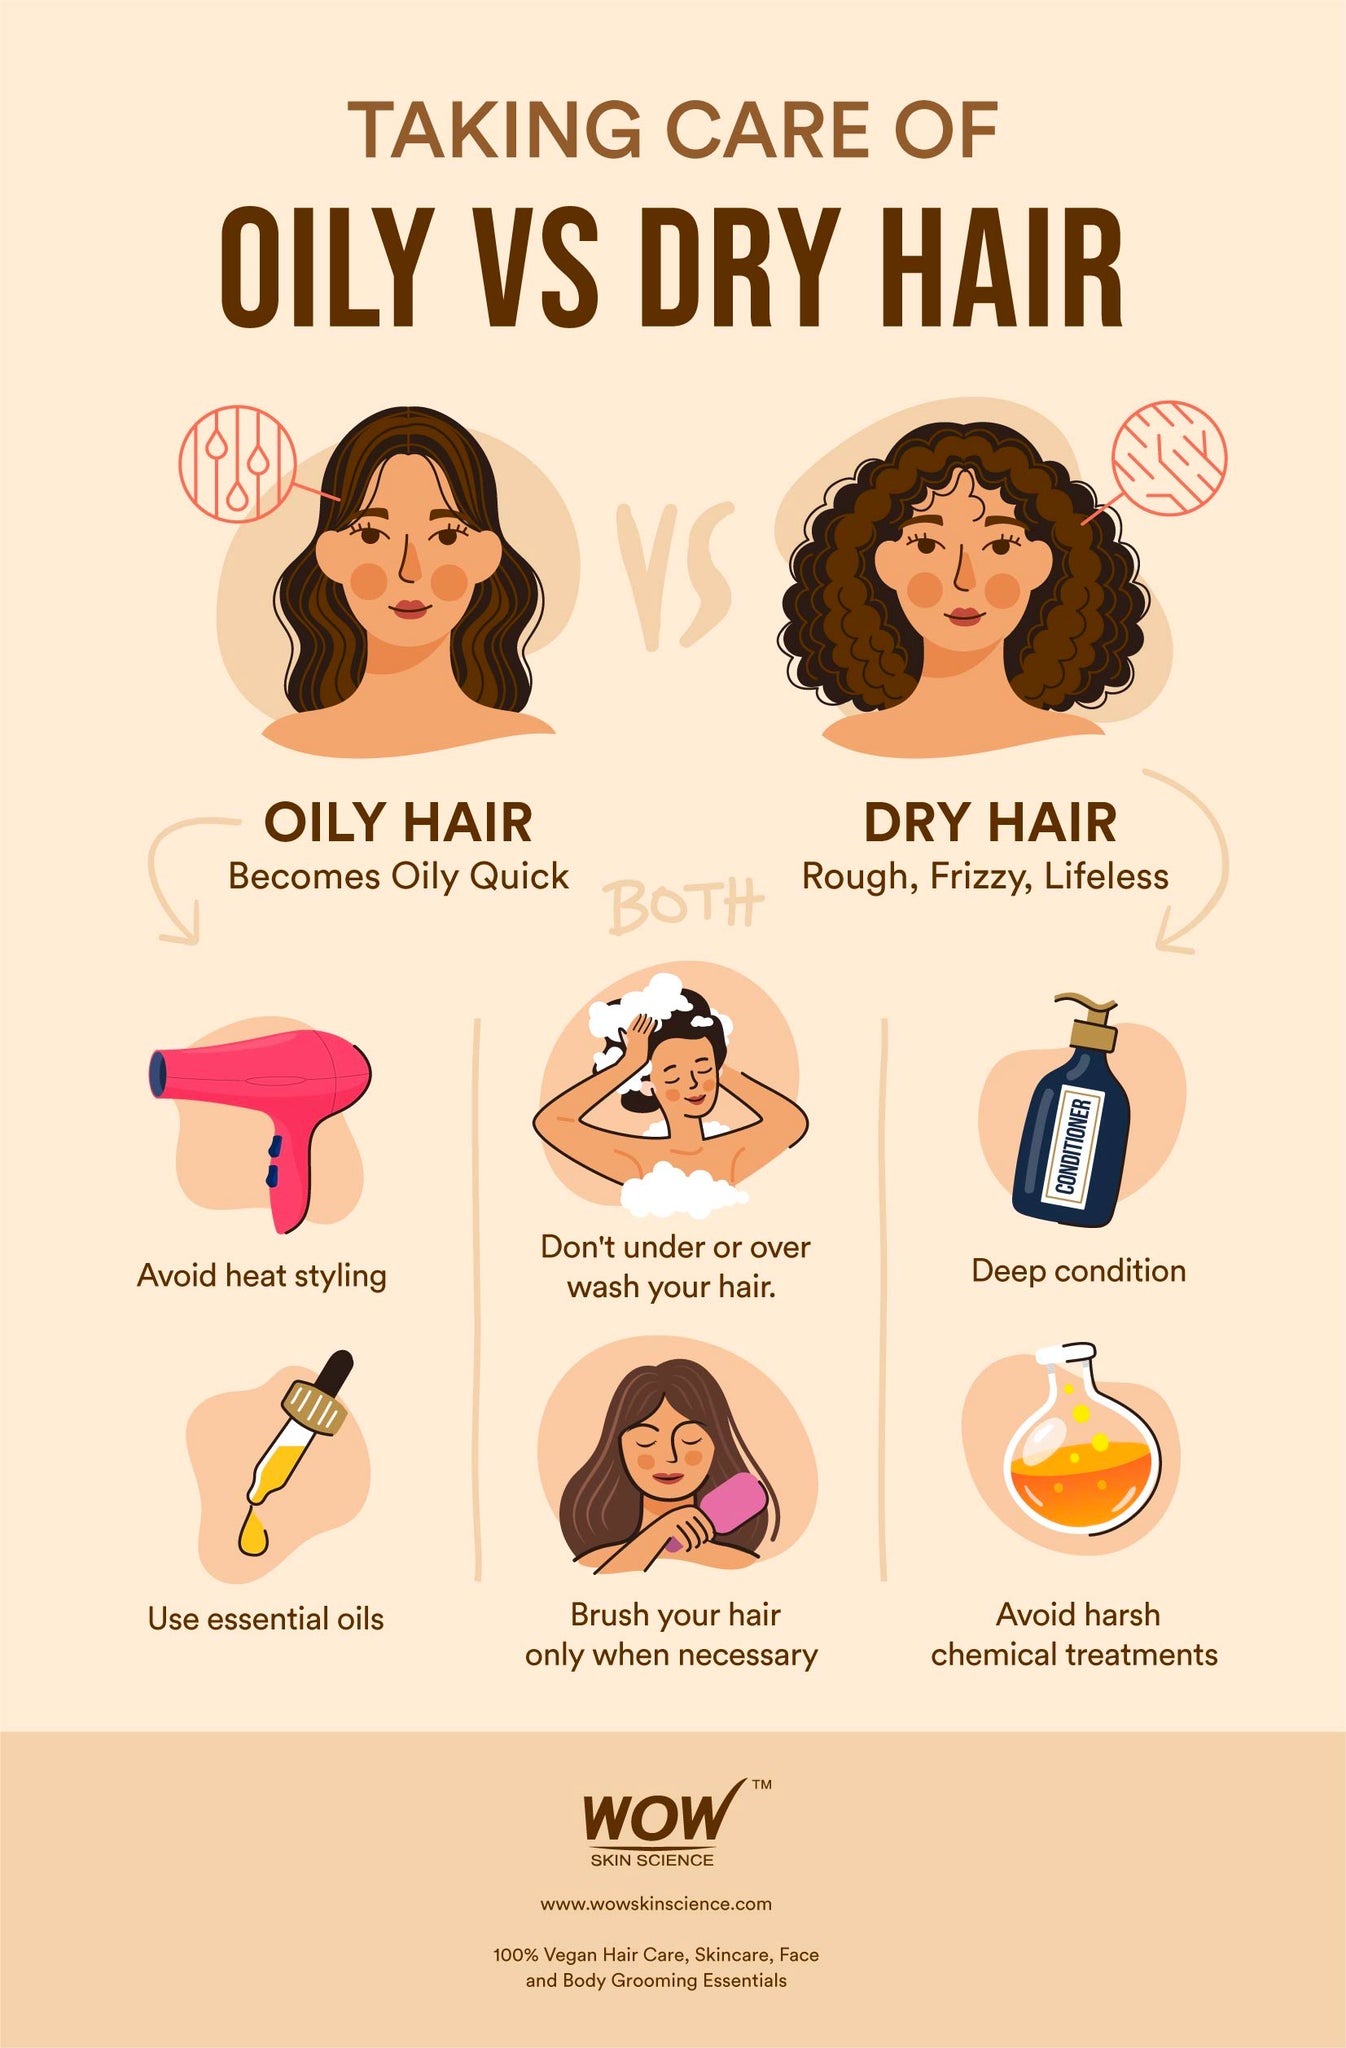 How to Tell if Hair is Dry or Oily